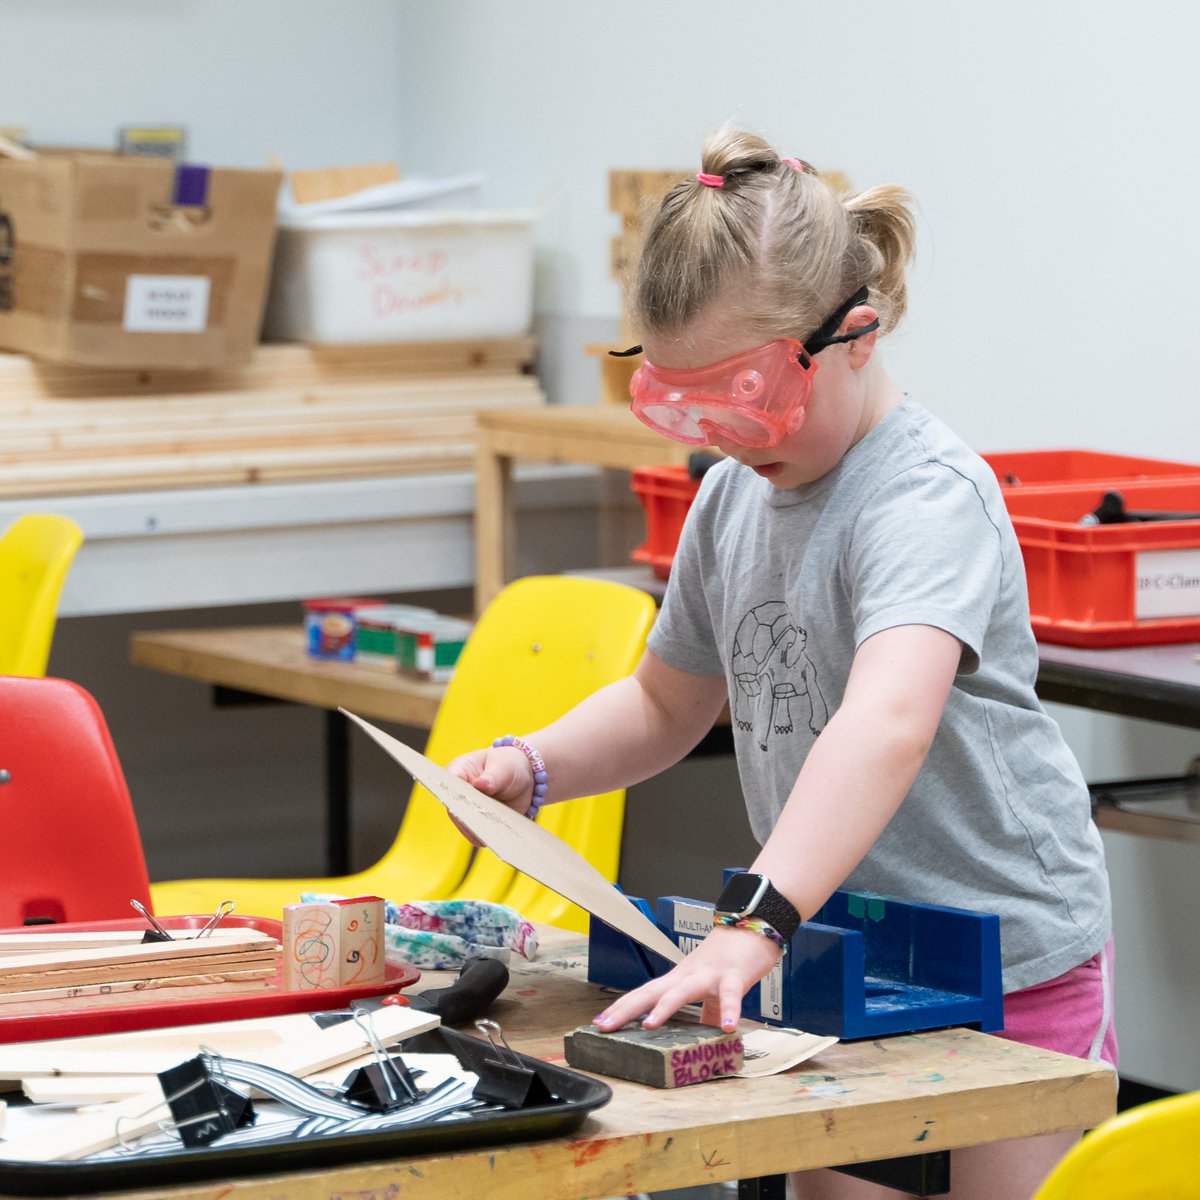 We’re thrilled to be mentioned among the top STEM summer camps in #MN! If you’re looking for ways to keep your kids engaged and learning this summer, you’re in luck. From coding to conservation, there are so many wonderful local opportunities to explore. bit.ly/4aDTY0h